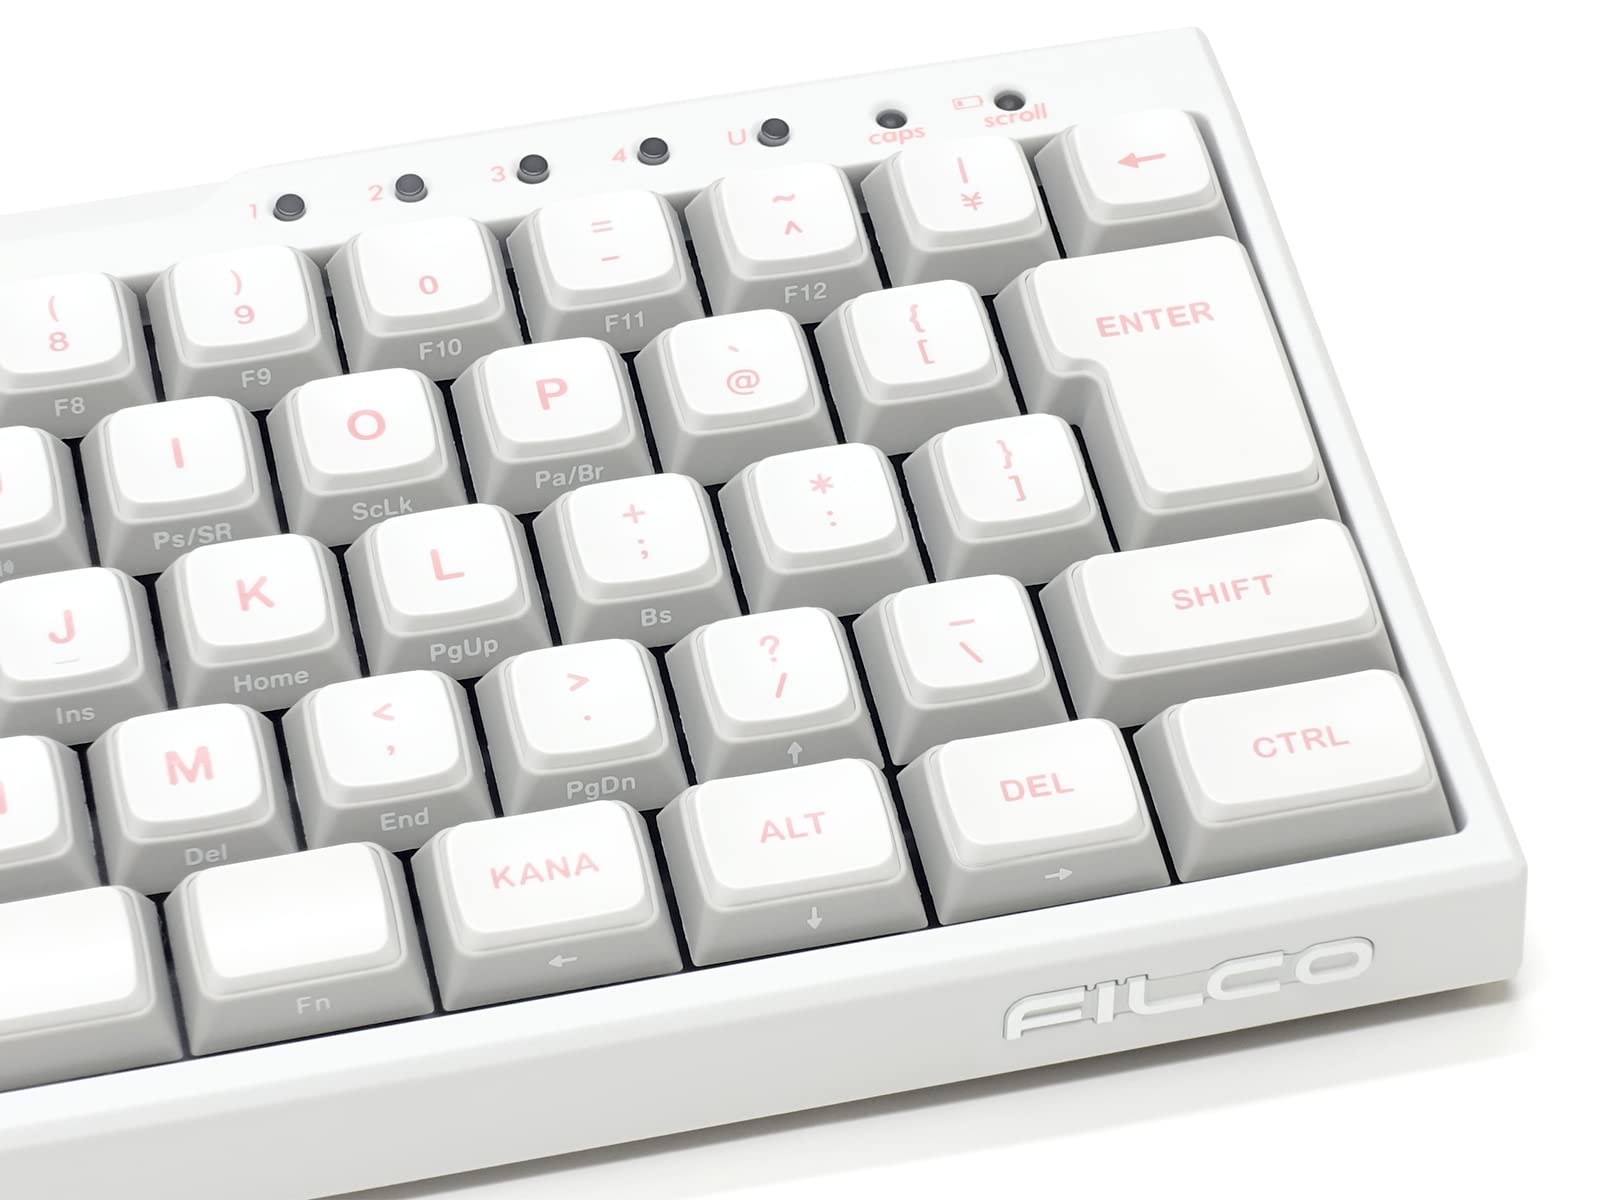 Filco Majestouch MINILA-R Convertible Quiet Red Axis White Mechanical Keyboard, Japanese Layout, 66 Keys, Bluetooth Wireless, USB Wired Compatible, DIP Switch, Compact Keyboard